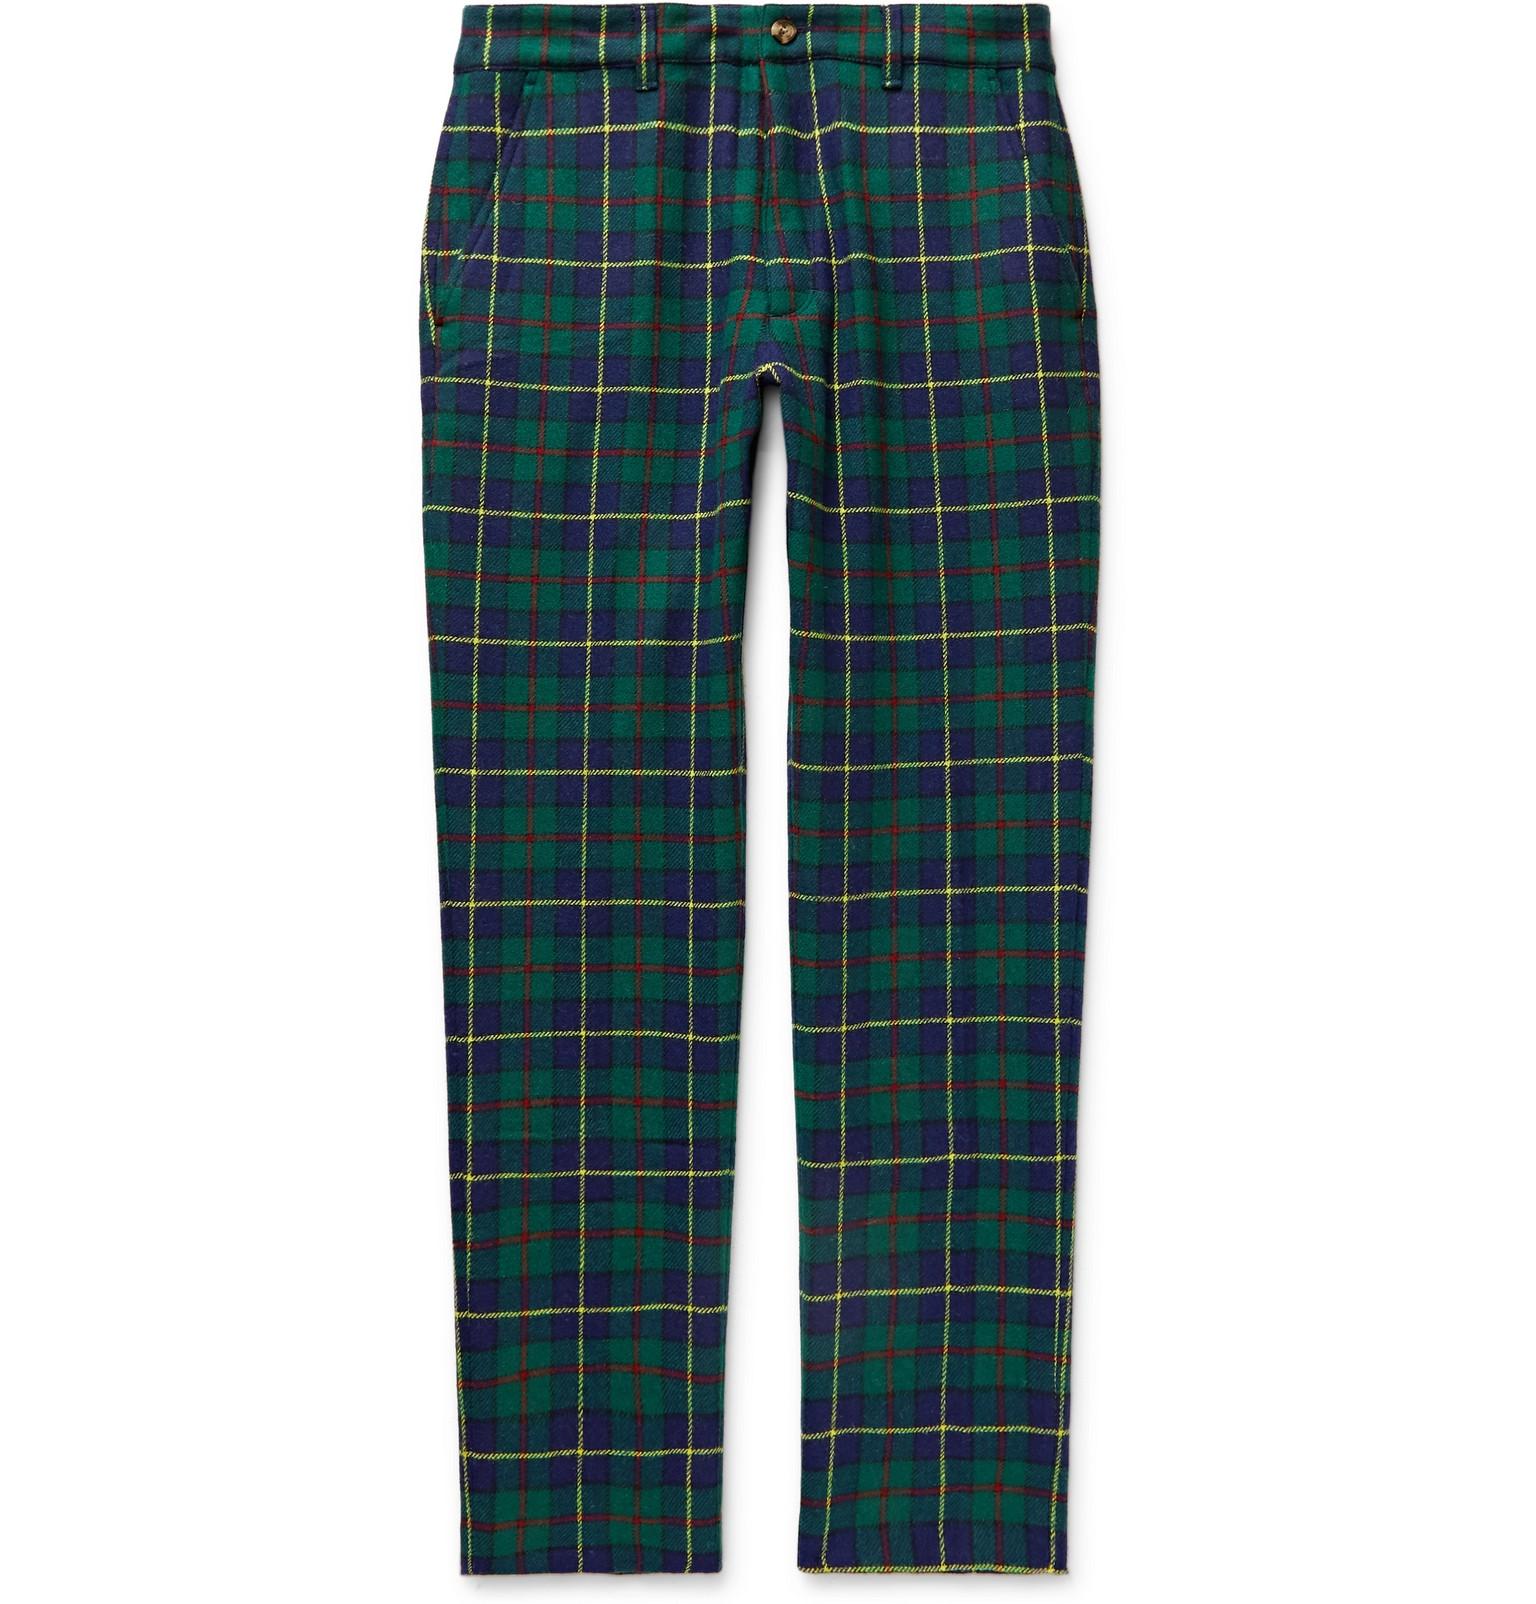 Aimé Leon Dore Slim-fit Checked Wool-blend Trousers in Green for Men - Lyst